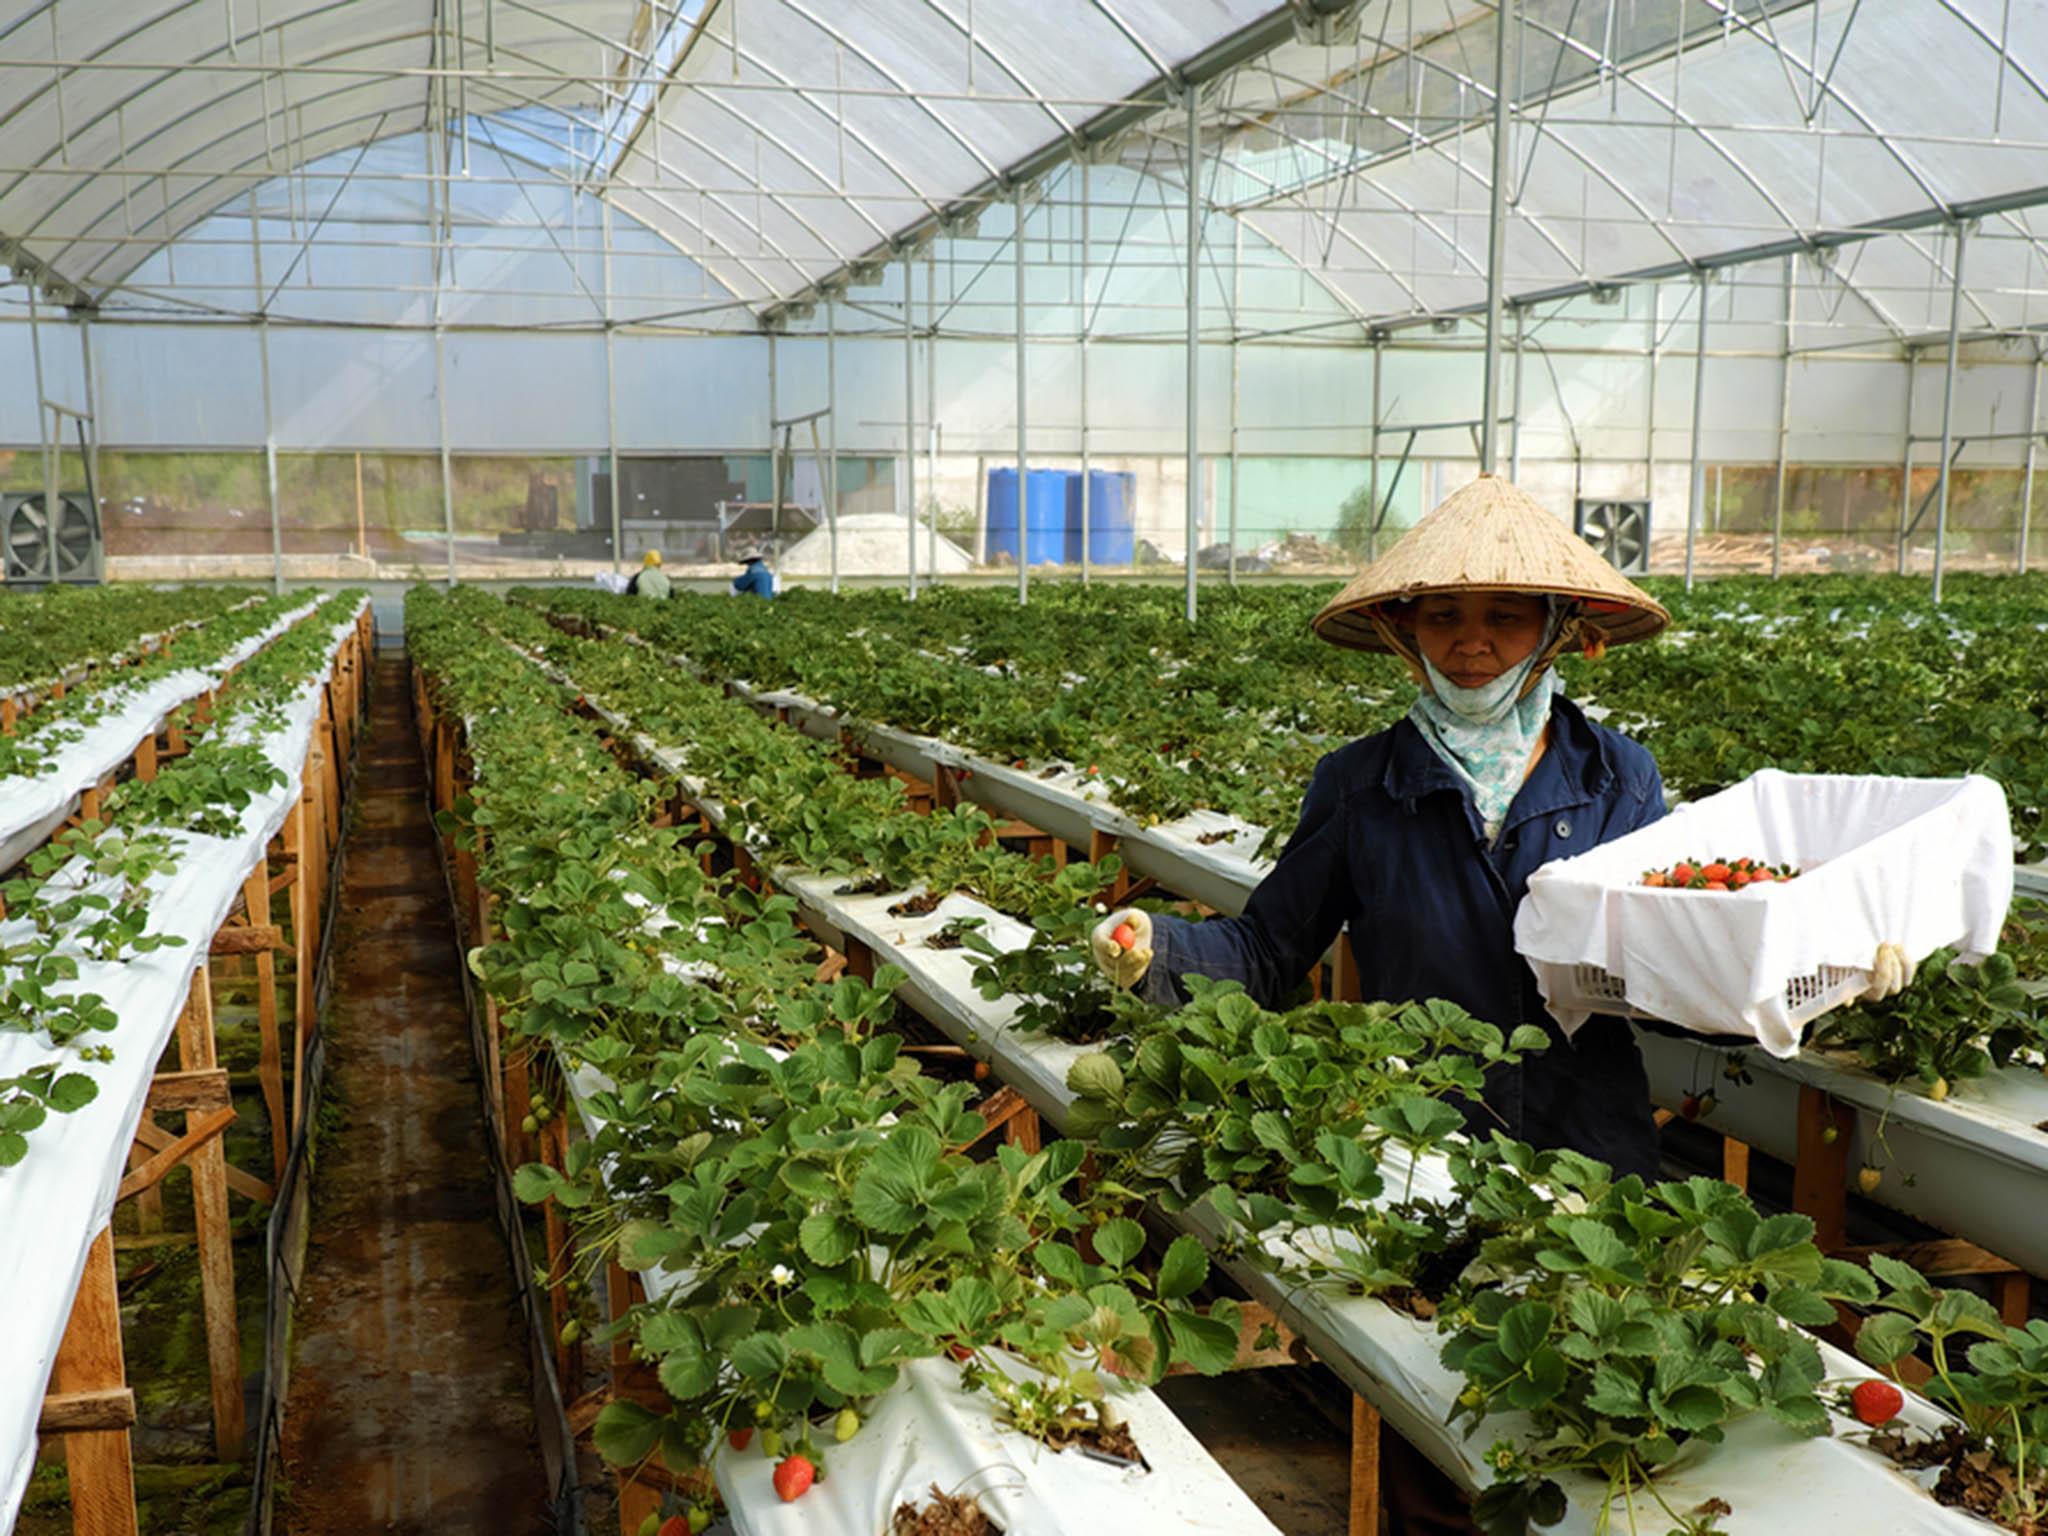 DA LAT, VIET NAM- FEB 9, 2016: Female worker working on strawberry garden, high tech agriculture to make clean and safe product, woman harvest fruit from strawberries plant at Dalat, Vietnam